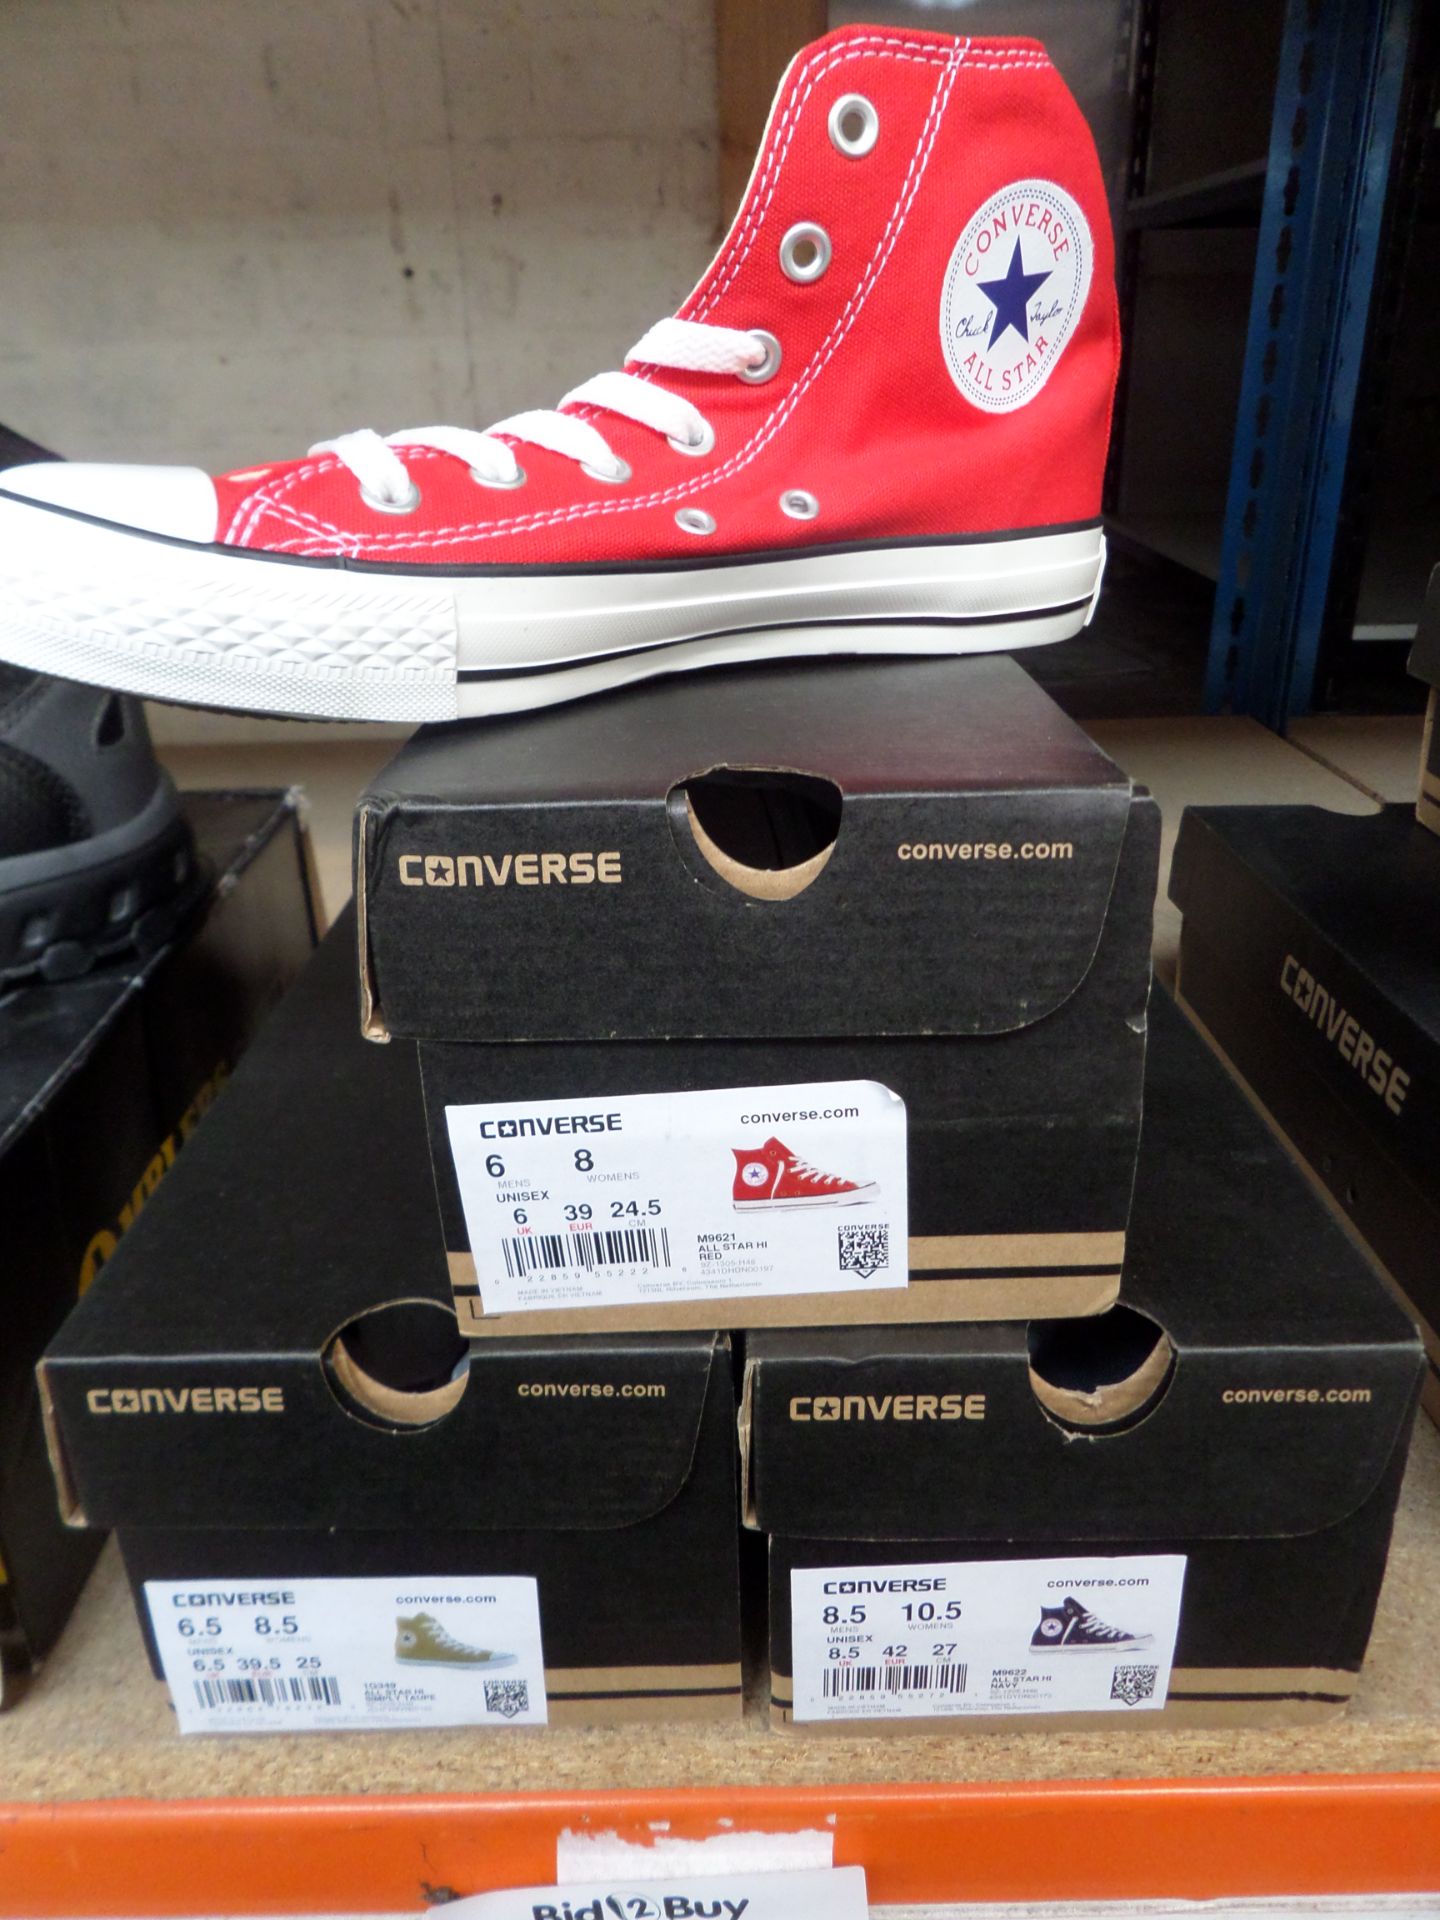 3 X Converse All Star Hi Top Canvass Trainer Navy/Taupe/Red Sizes 6-8.5 (New)